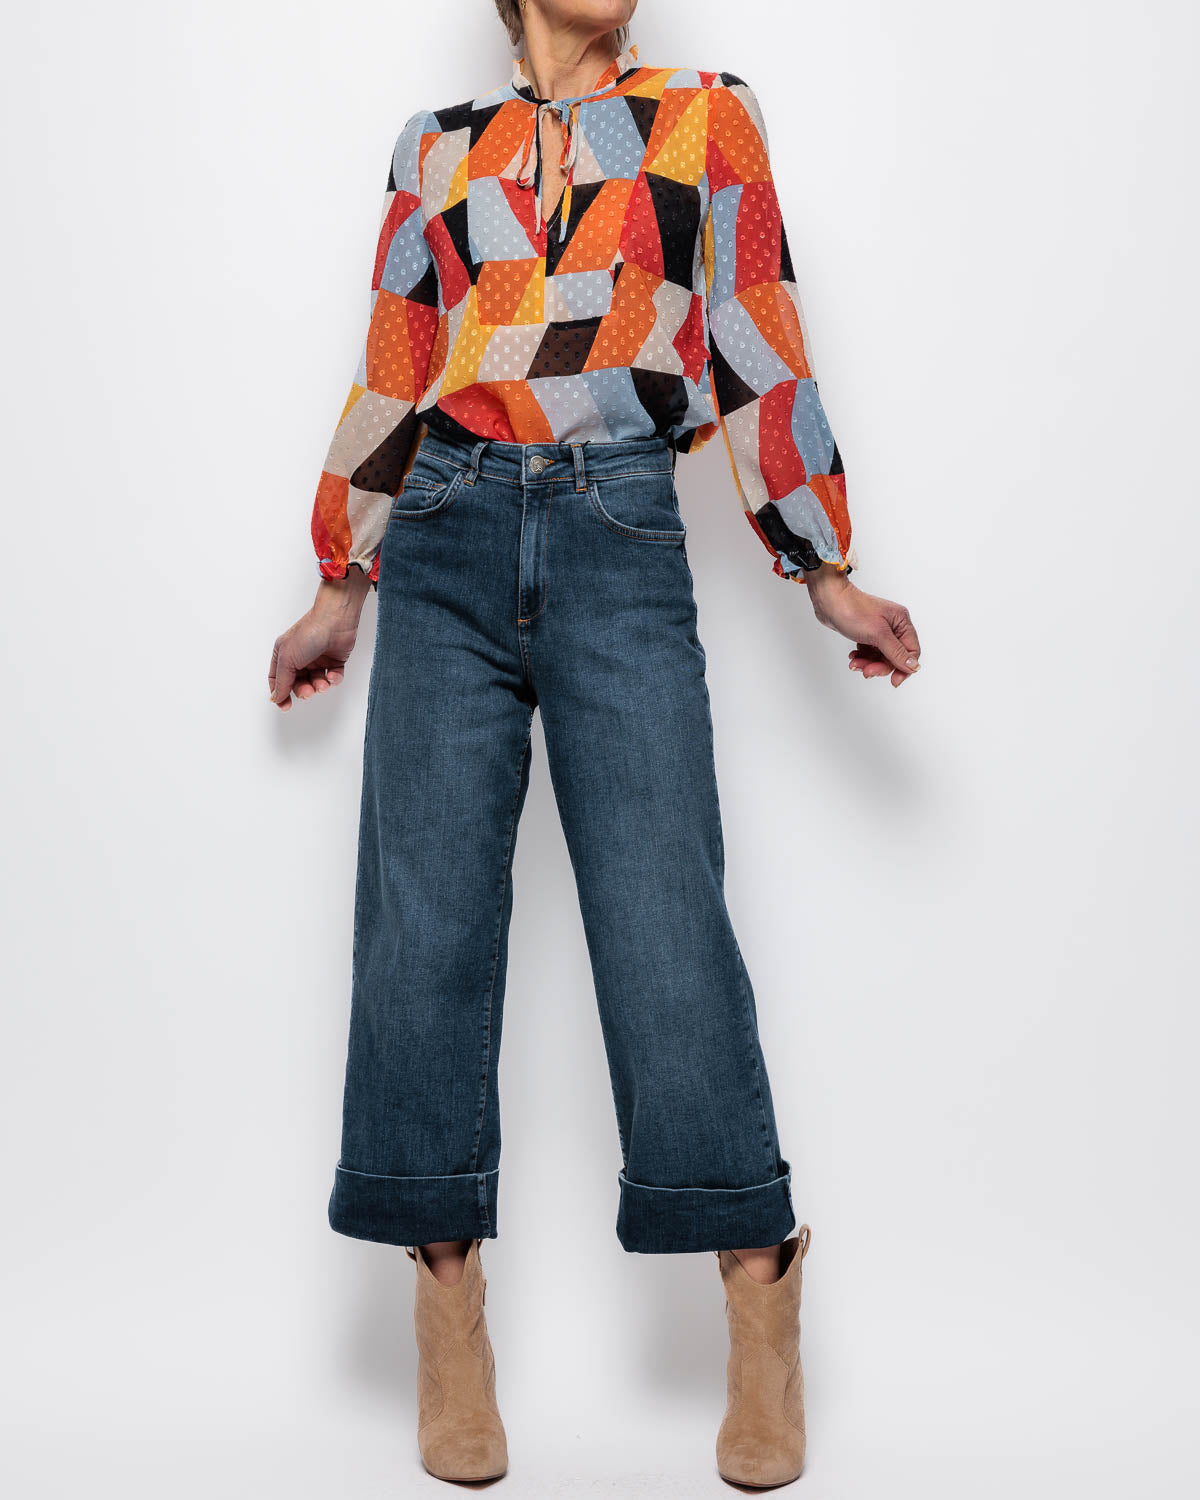 Emme Marella Calerno Blouse in Large Multi Print